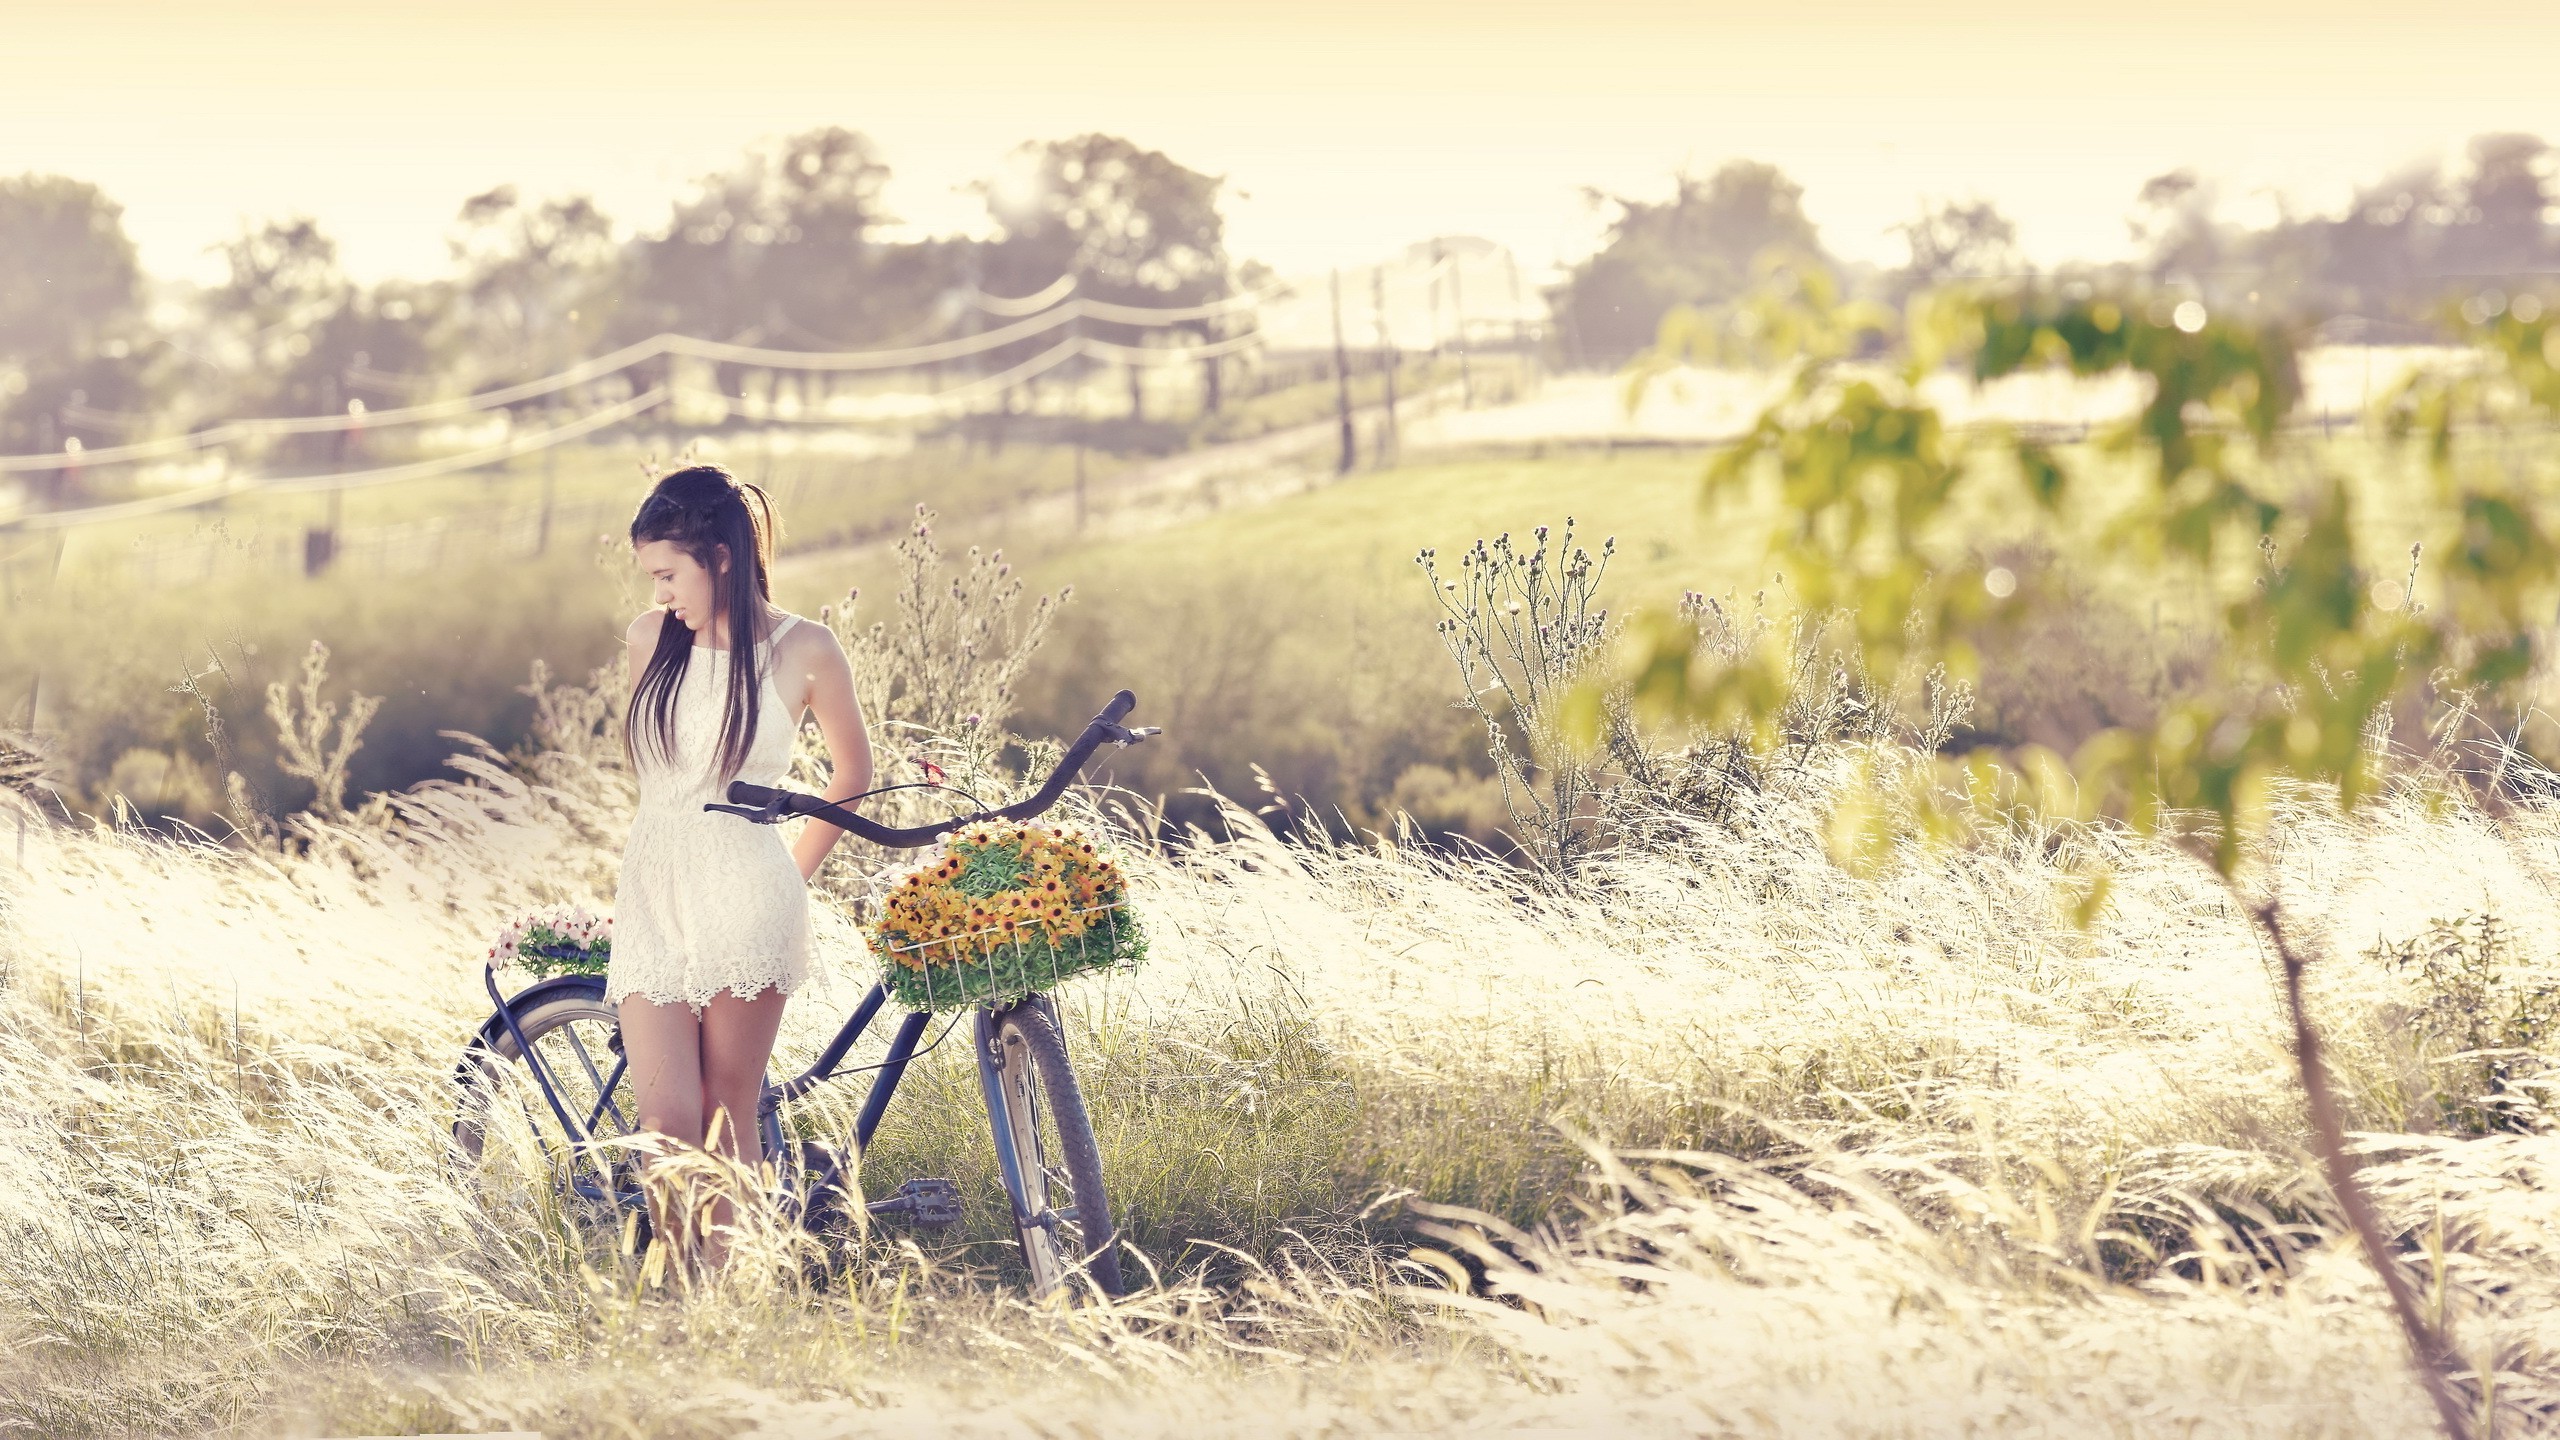 women Outdoors, Women With Bicycles, Model, Nature, Bicycle Wallpaper